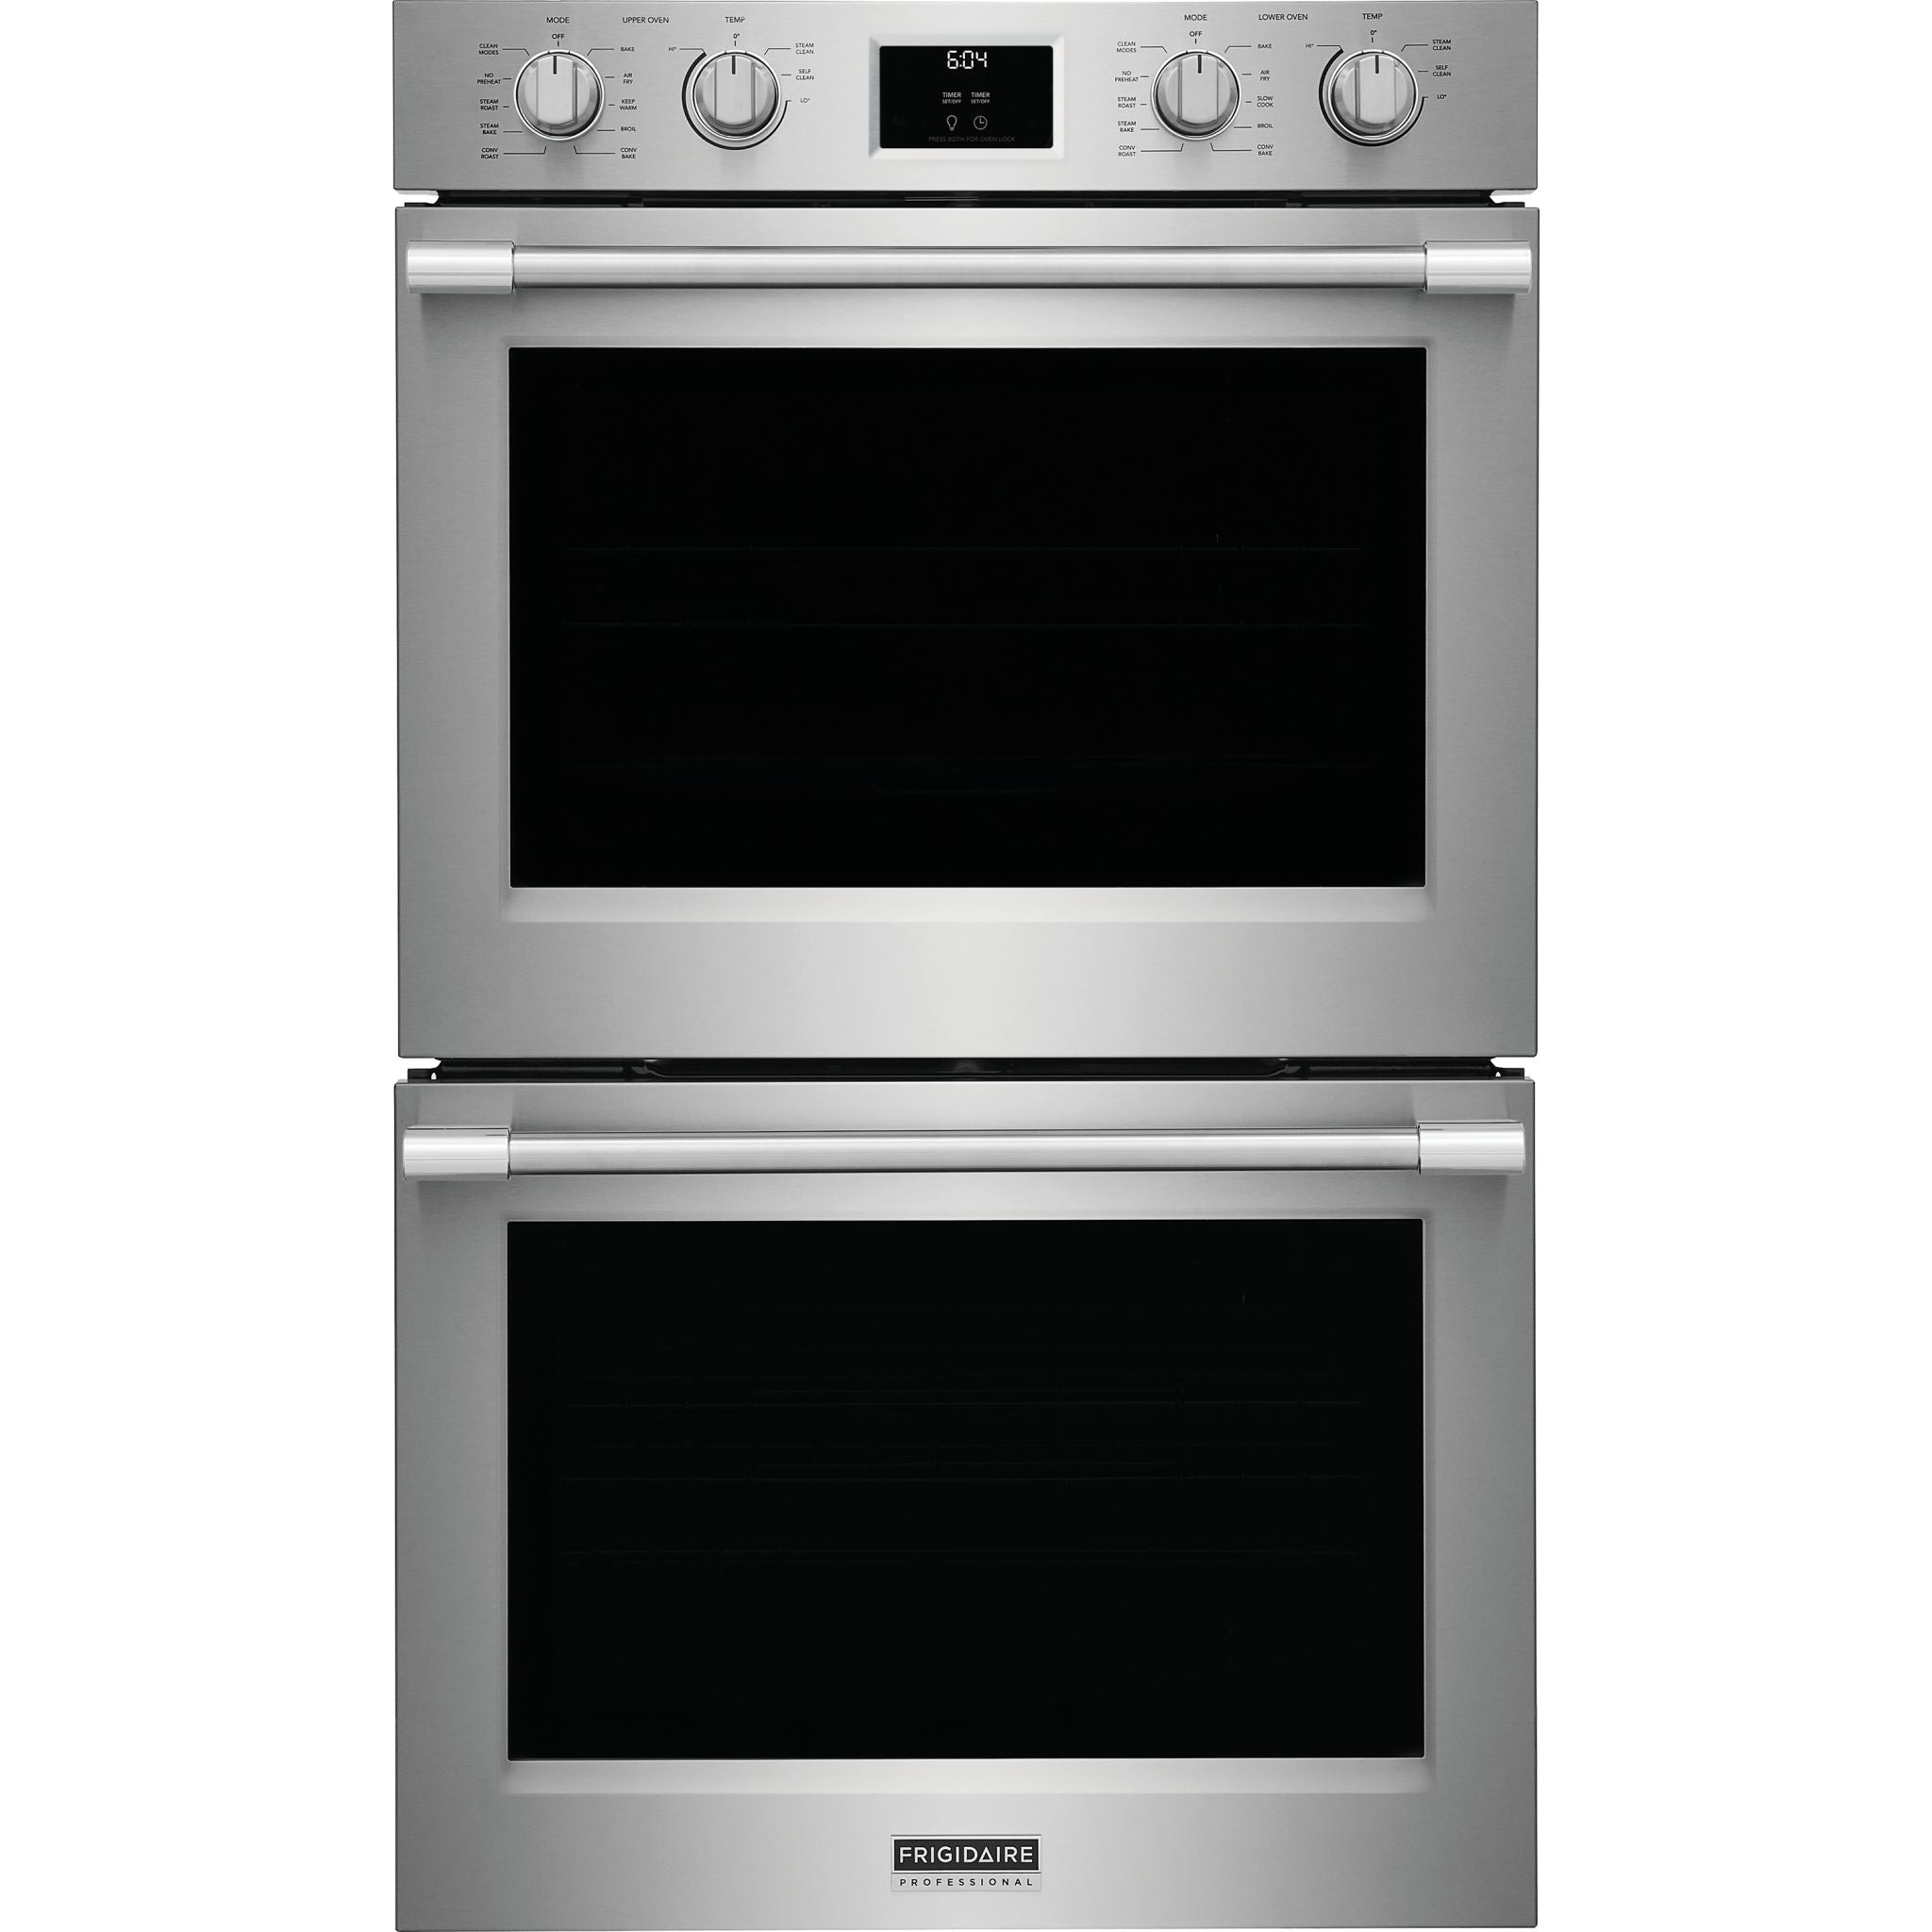 Frigidaire Professional, Frigidaire Professional 30" True Convection Wall Oven (PCWD3080AF) - Stainless Steel